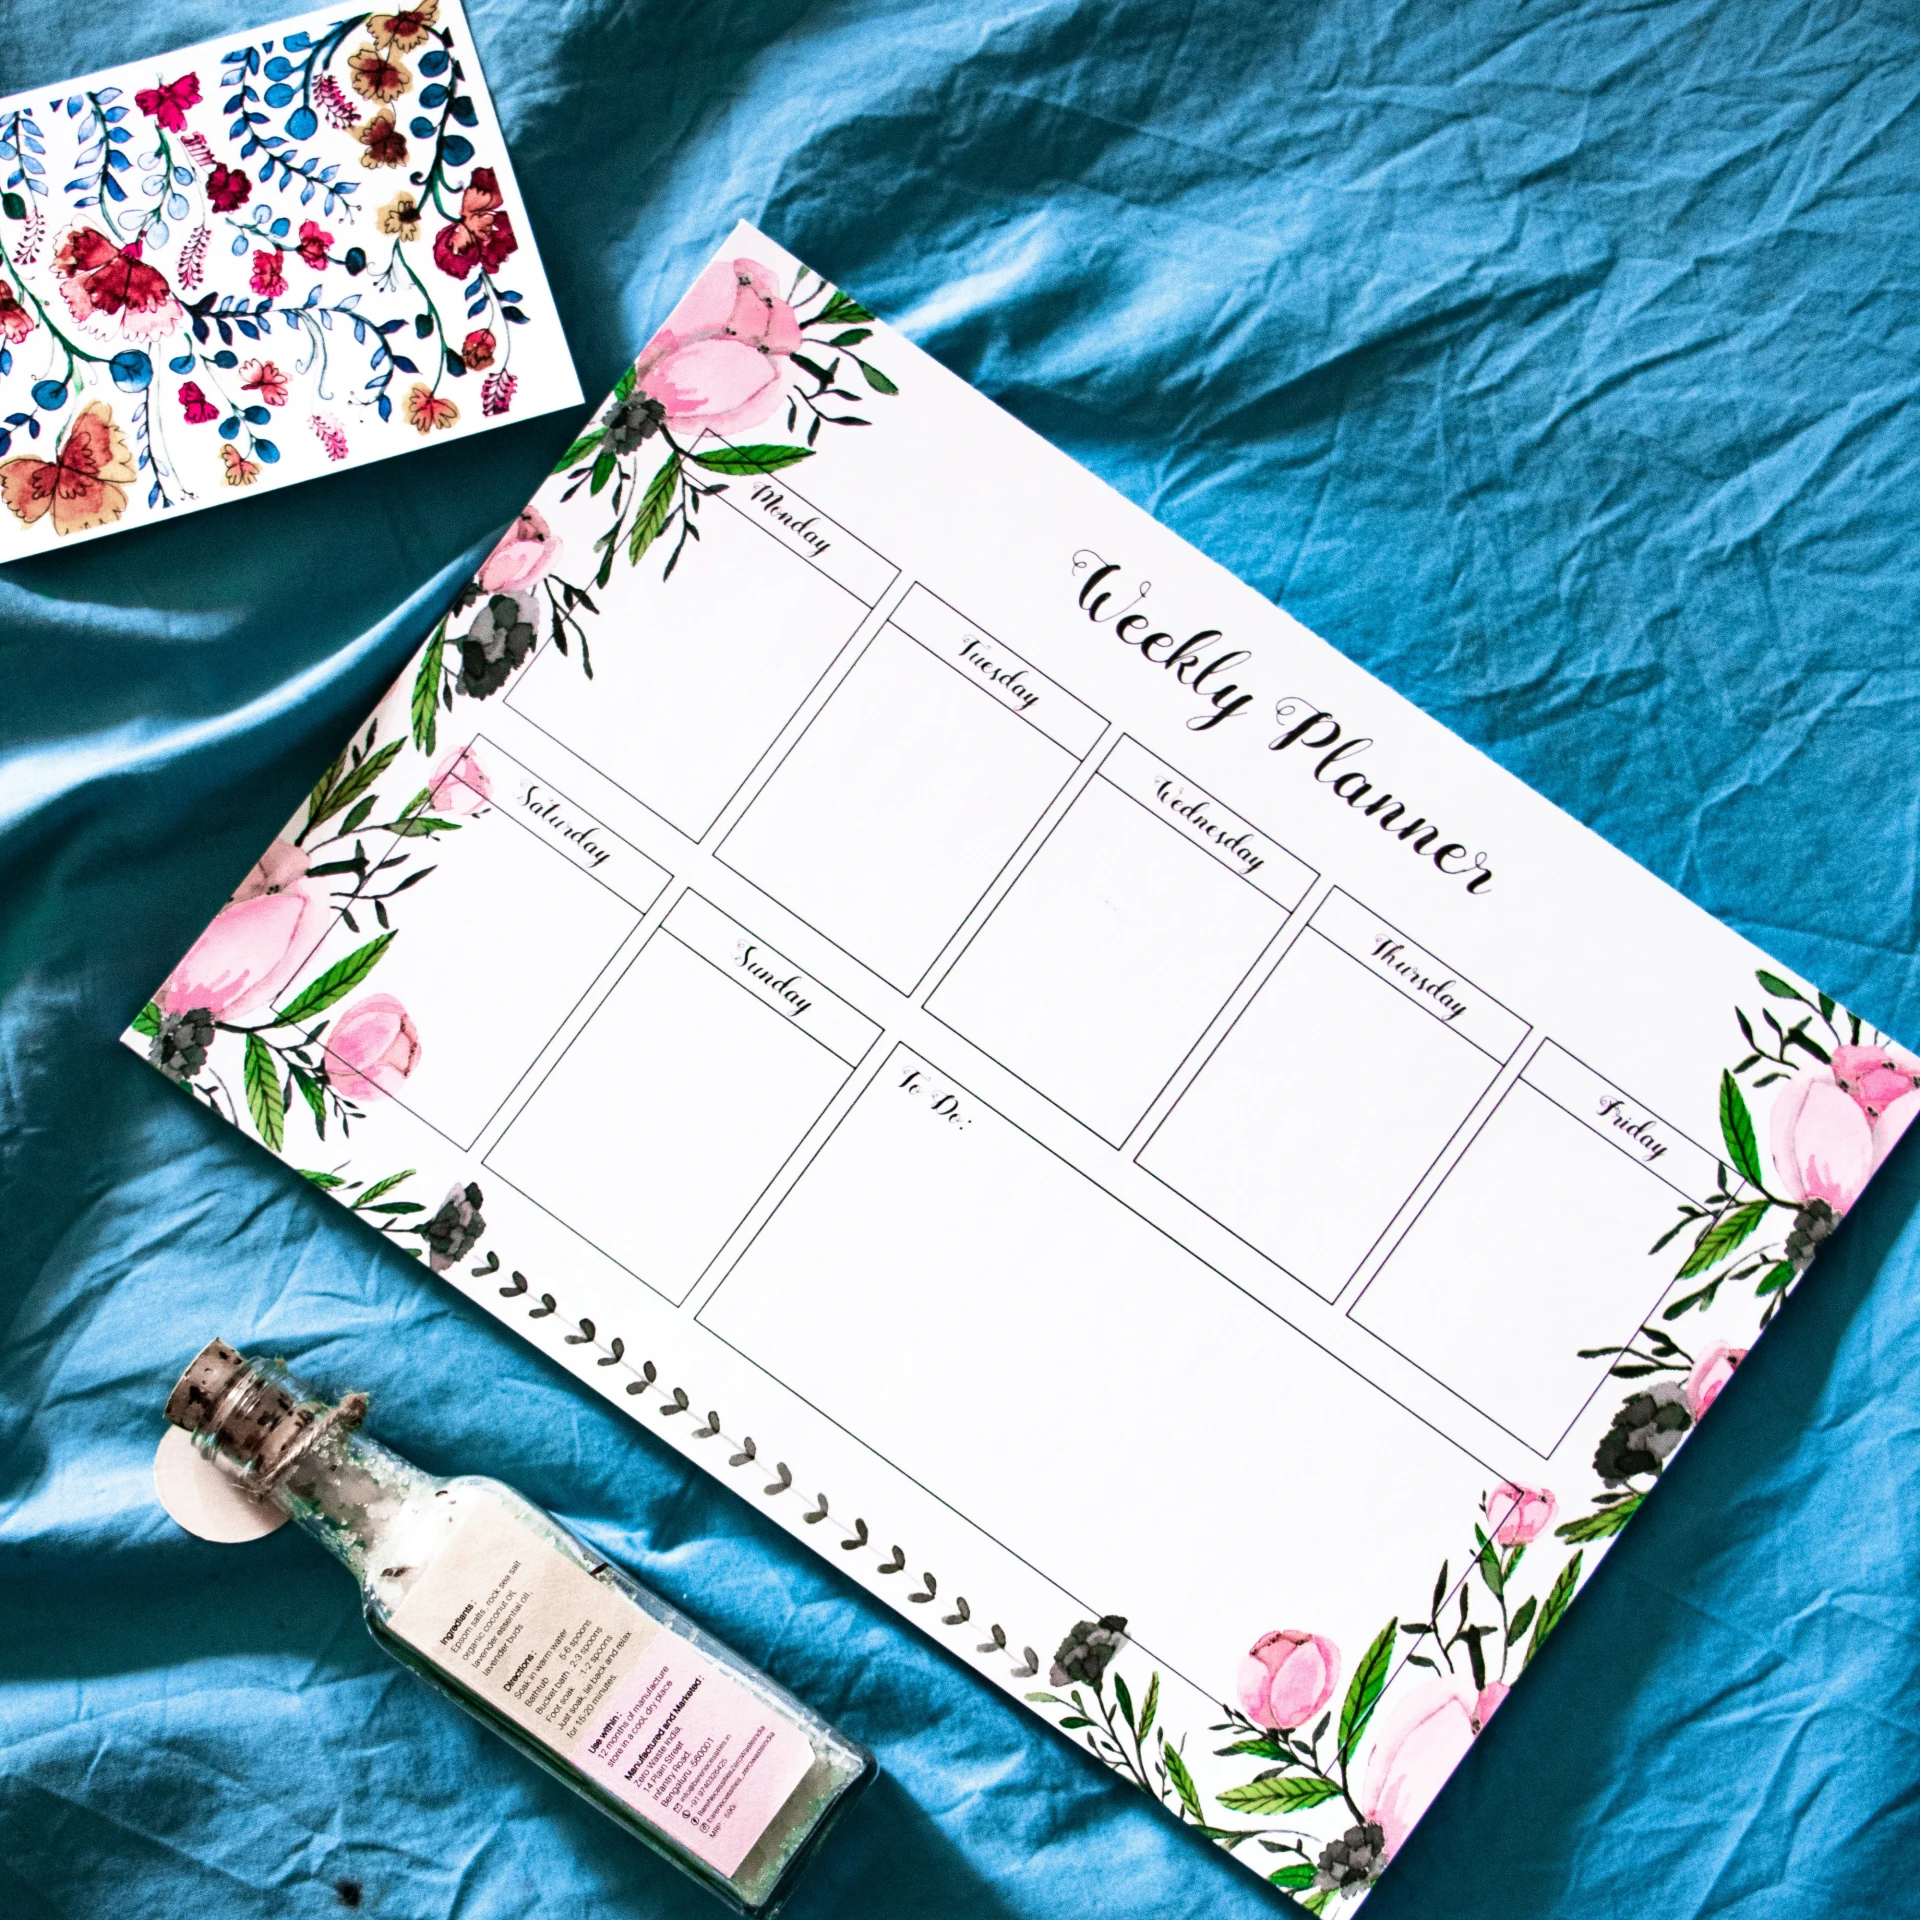 a personal check list with pink flowers, seeds and an empty bottle